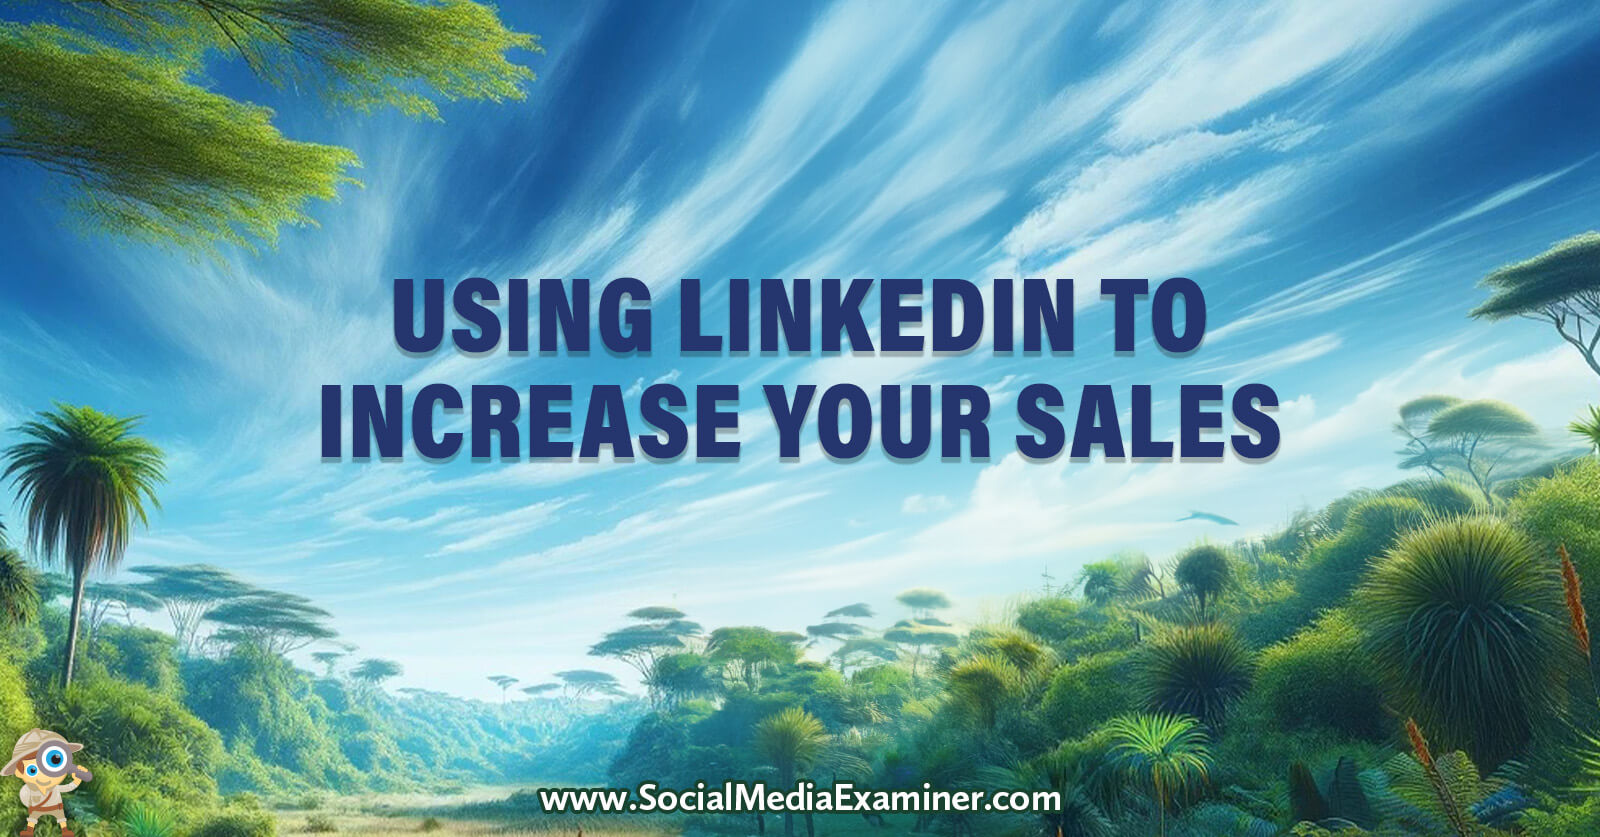 Using LinkedIn to Increase Your Sales by Social Media Examiner